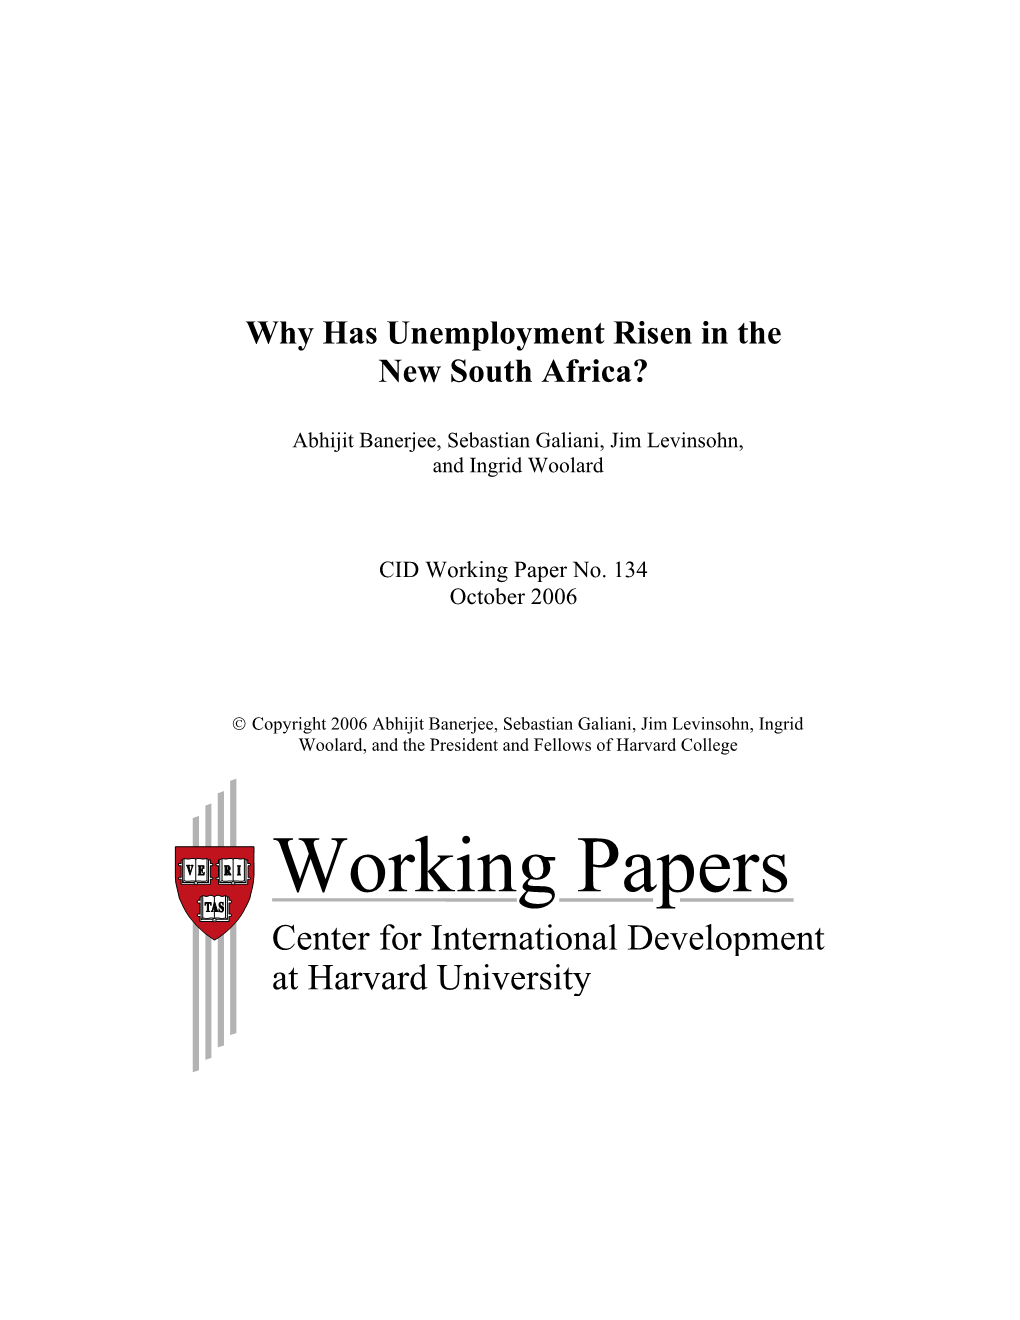 CID Working Paper No. 134 :: Why Has Unemployment Risen in the New South Africa?